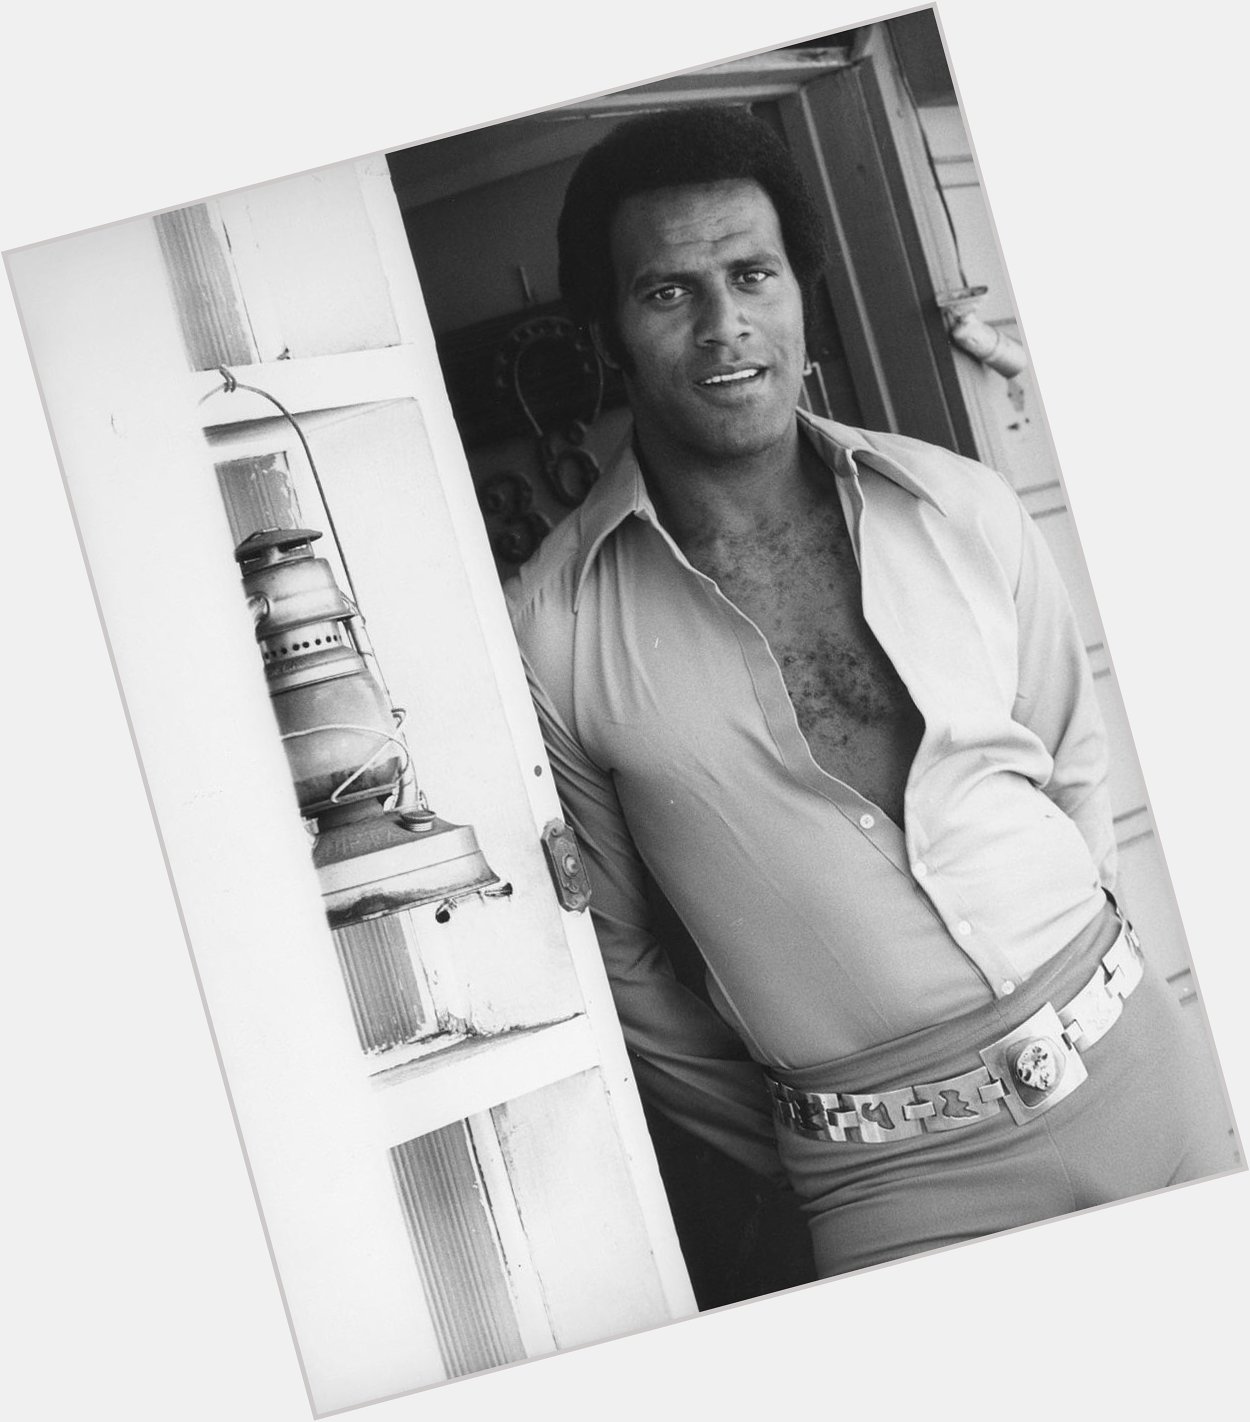 Happy Birthday to Fred Williamson! I\ve met him in person, and he\s every bit as badass as you would expect. 